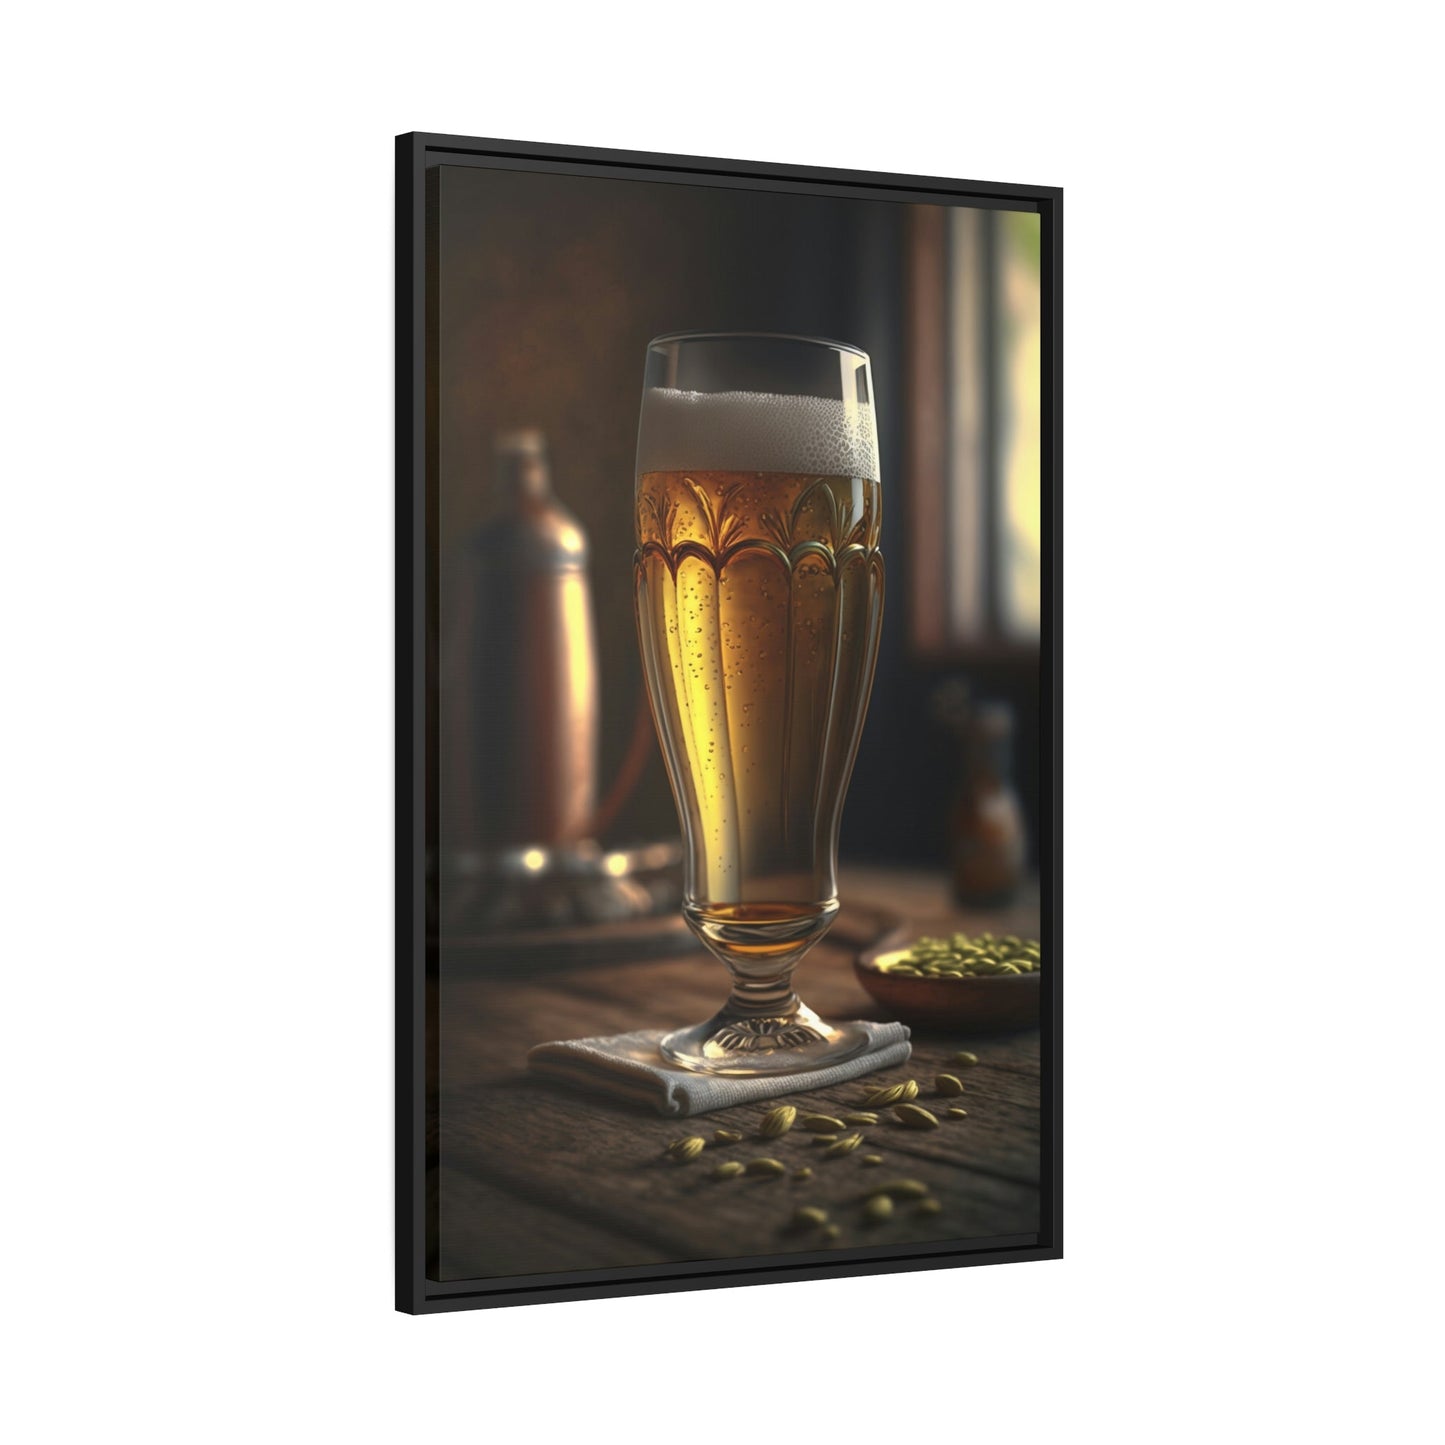 The Art of Beer: Canvas and Poster Depicting Your Favorite Brews